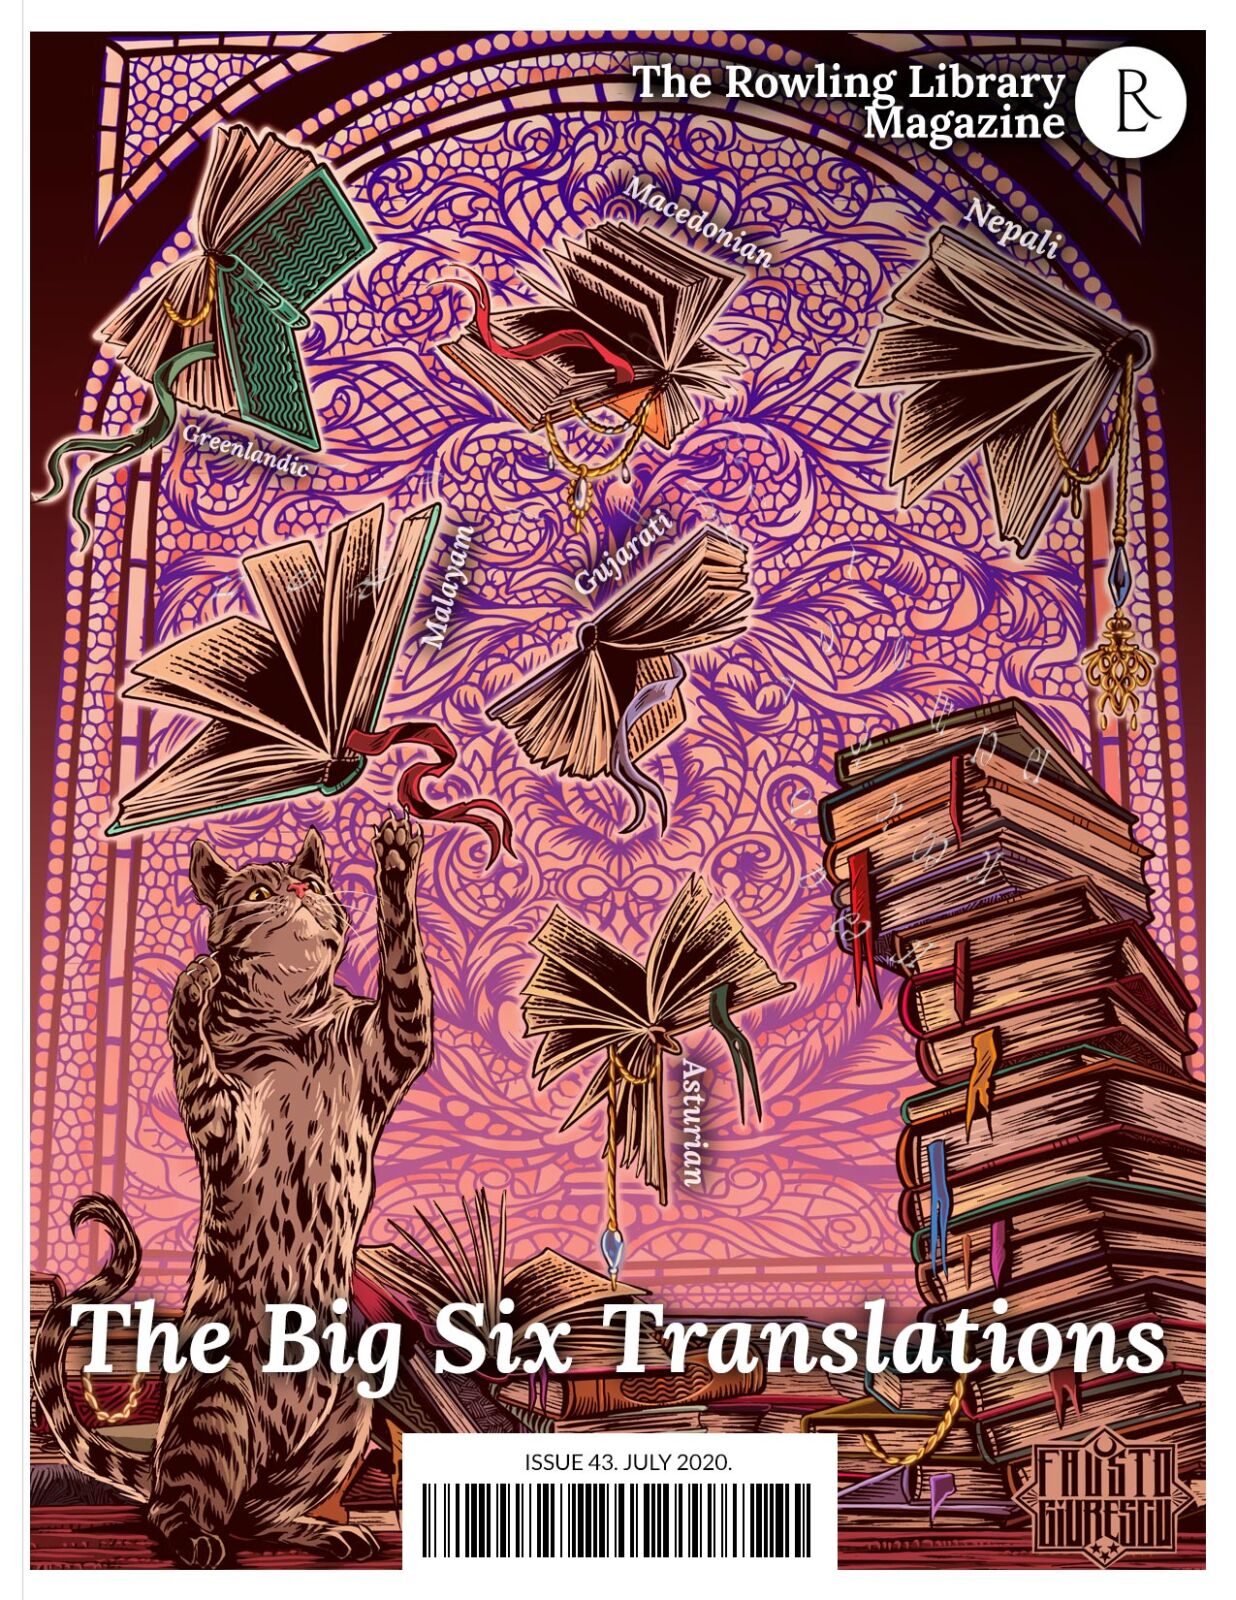 The Rowling Library Magazine #43 (July 2020): The Six Translations